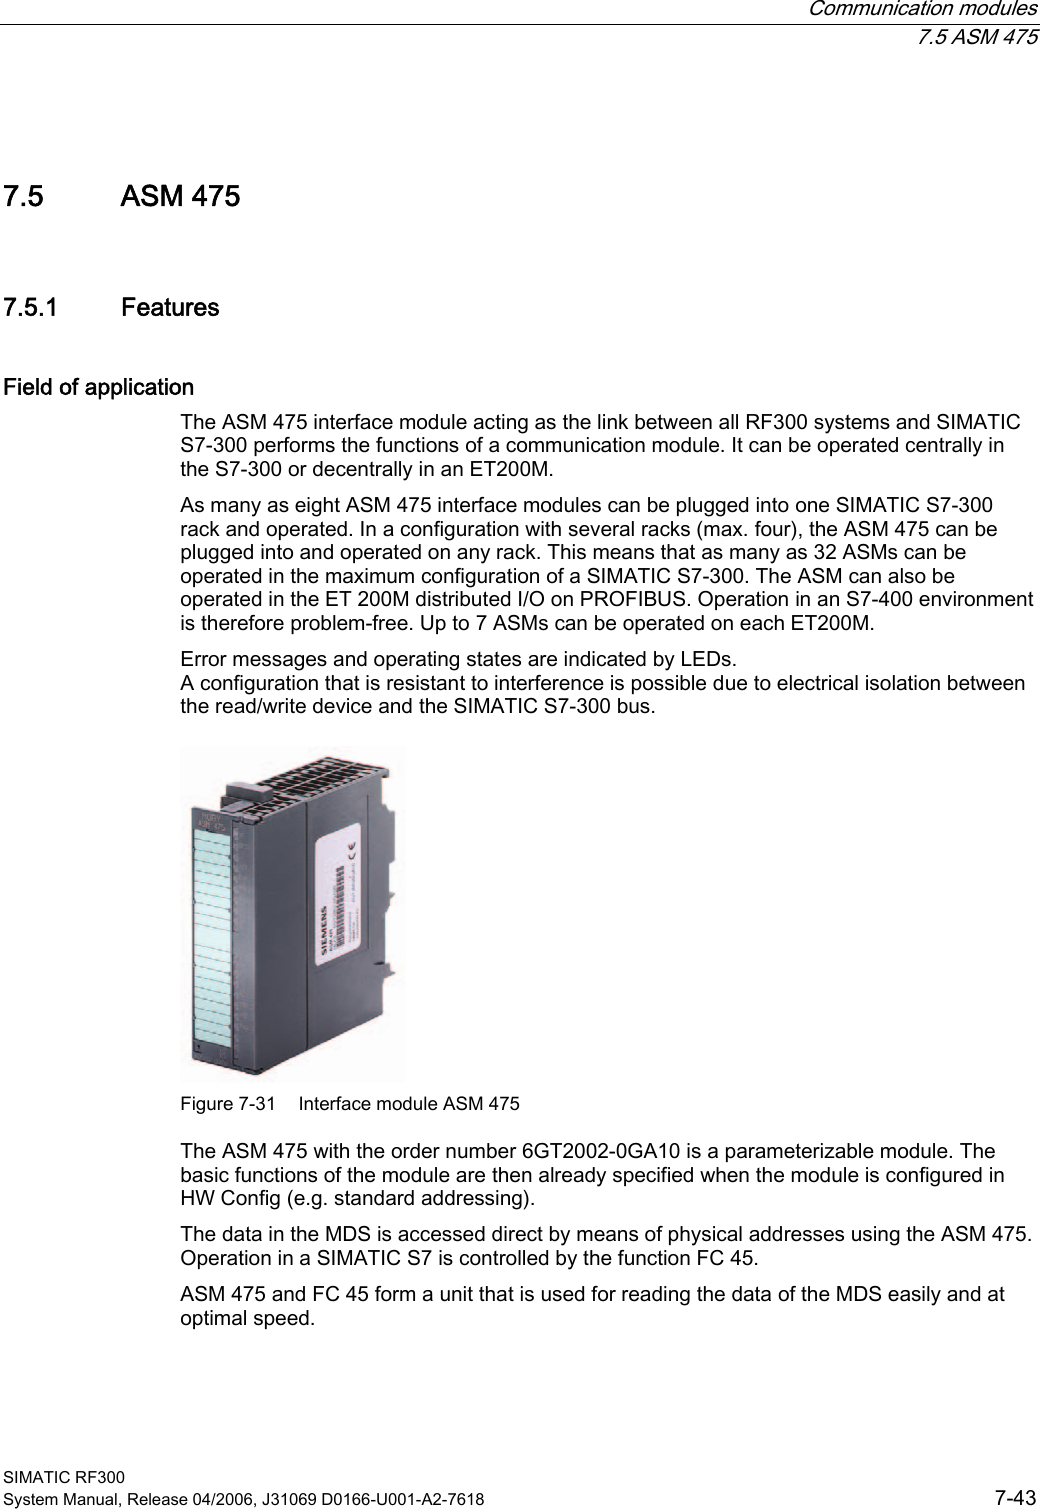  Communication modules  7.5 ASM 475 SIMATIC RF300 System Manual, Release 04/2006, J31069 D0166-U001-A2-7618  7-43 7.5 7.5 ASM 475 7.5.1  Features Field of application The ASM 475 interface module acting as the link between all RF300 systems and SIMATIC S7-300 performs the functions of a communication module. It can be operated centrally in the S7-300 or decentrally in an ET200M. As many as eight ASM 475 interface modules can be plugged into one SIMATIC S7-300 rack and operated. In a configuration with several racks (max. four), the ASM 475 can be plugged into and operated on any rack. This means that as many as 32 ASMs can be operated in the maximum configuration of a SIMATIC S7-300. The ASM can also be operated in the ET 200M distributed I/O on PROFIBUS. Operation in an S7-400 environment is therefore problem-free. Up to 7 ASMs can be operated on each ET200M. Error messages and operating states are indicated by LEDs. A configuration that is resistant to interference is possible due to electrical isolation between the read/write device and the SIMATIC S7-300 bus.  Figure 7-31  Interface module ASM 475 The ASM 475 with the order number 6GT2002-0GA10 is a parameterizable module. The basic functions of the module are then already specified when the module is configured in HW Config (e.g. standard addressing). The data in the MDS is accessed direct by means of physical addresses using the ASM 475. Operation in a SIMATIC S7 is controlled by the function FC 45. ASM 475 and FC 45 form a unit that is used for reading the data of the MDS easily and at optimal speed. 